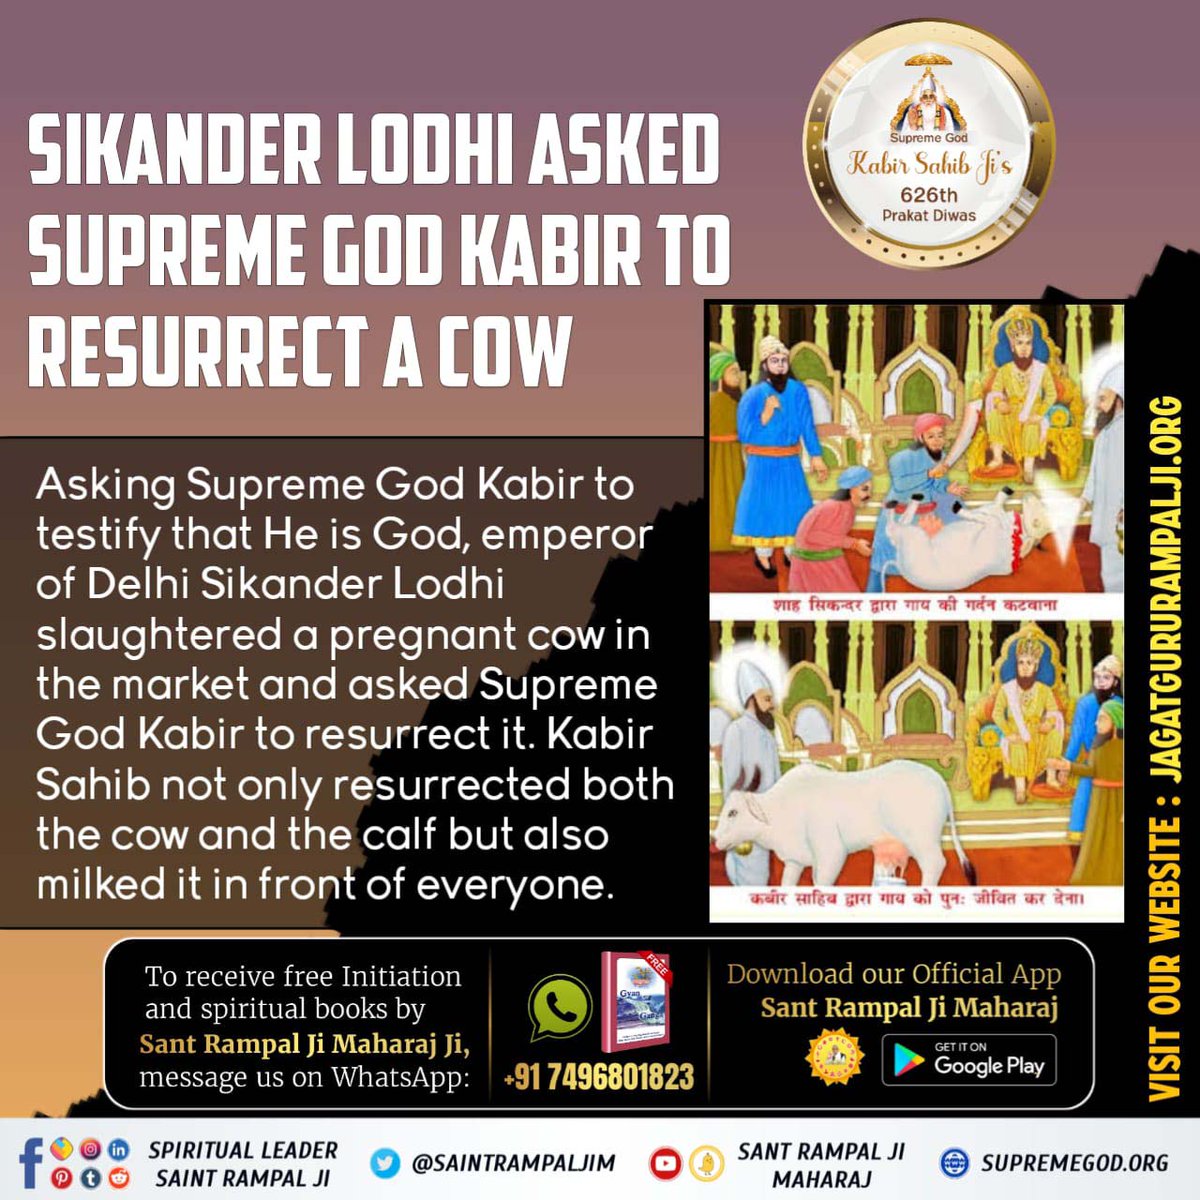 #कबीर_भगवान_के_चमत्कार
SIKANDER LODHI ASKED SUPREME GOD KABIR TO RESURRECT A COW